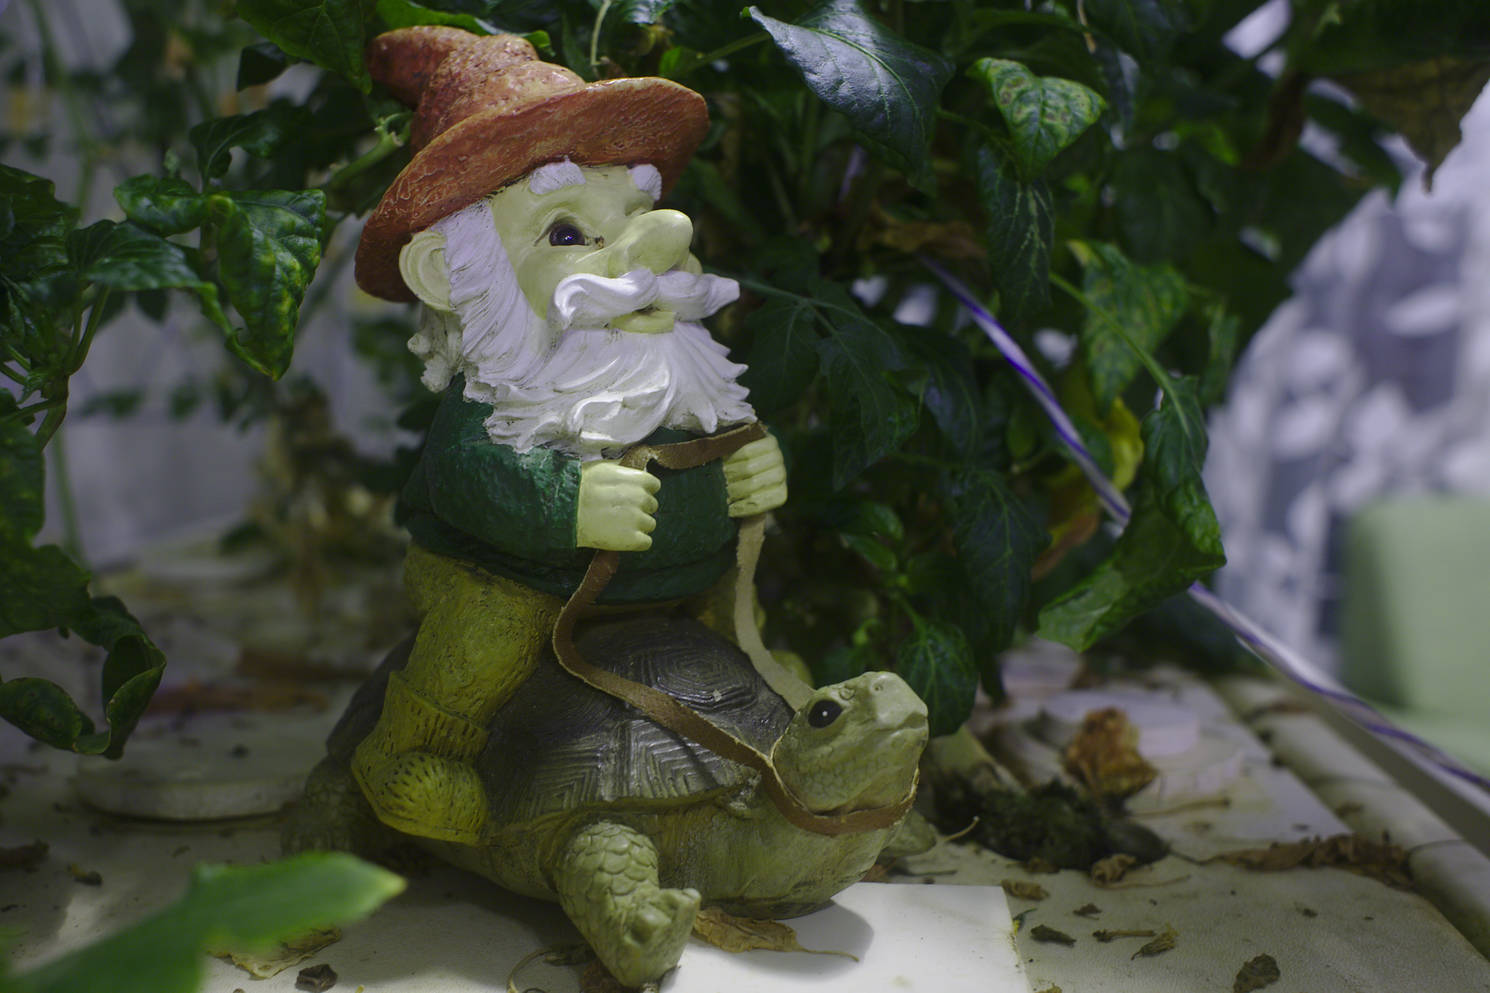 The greenhouse gnome riding a turtle. Because, why not?